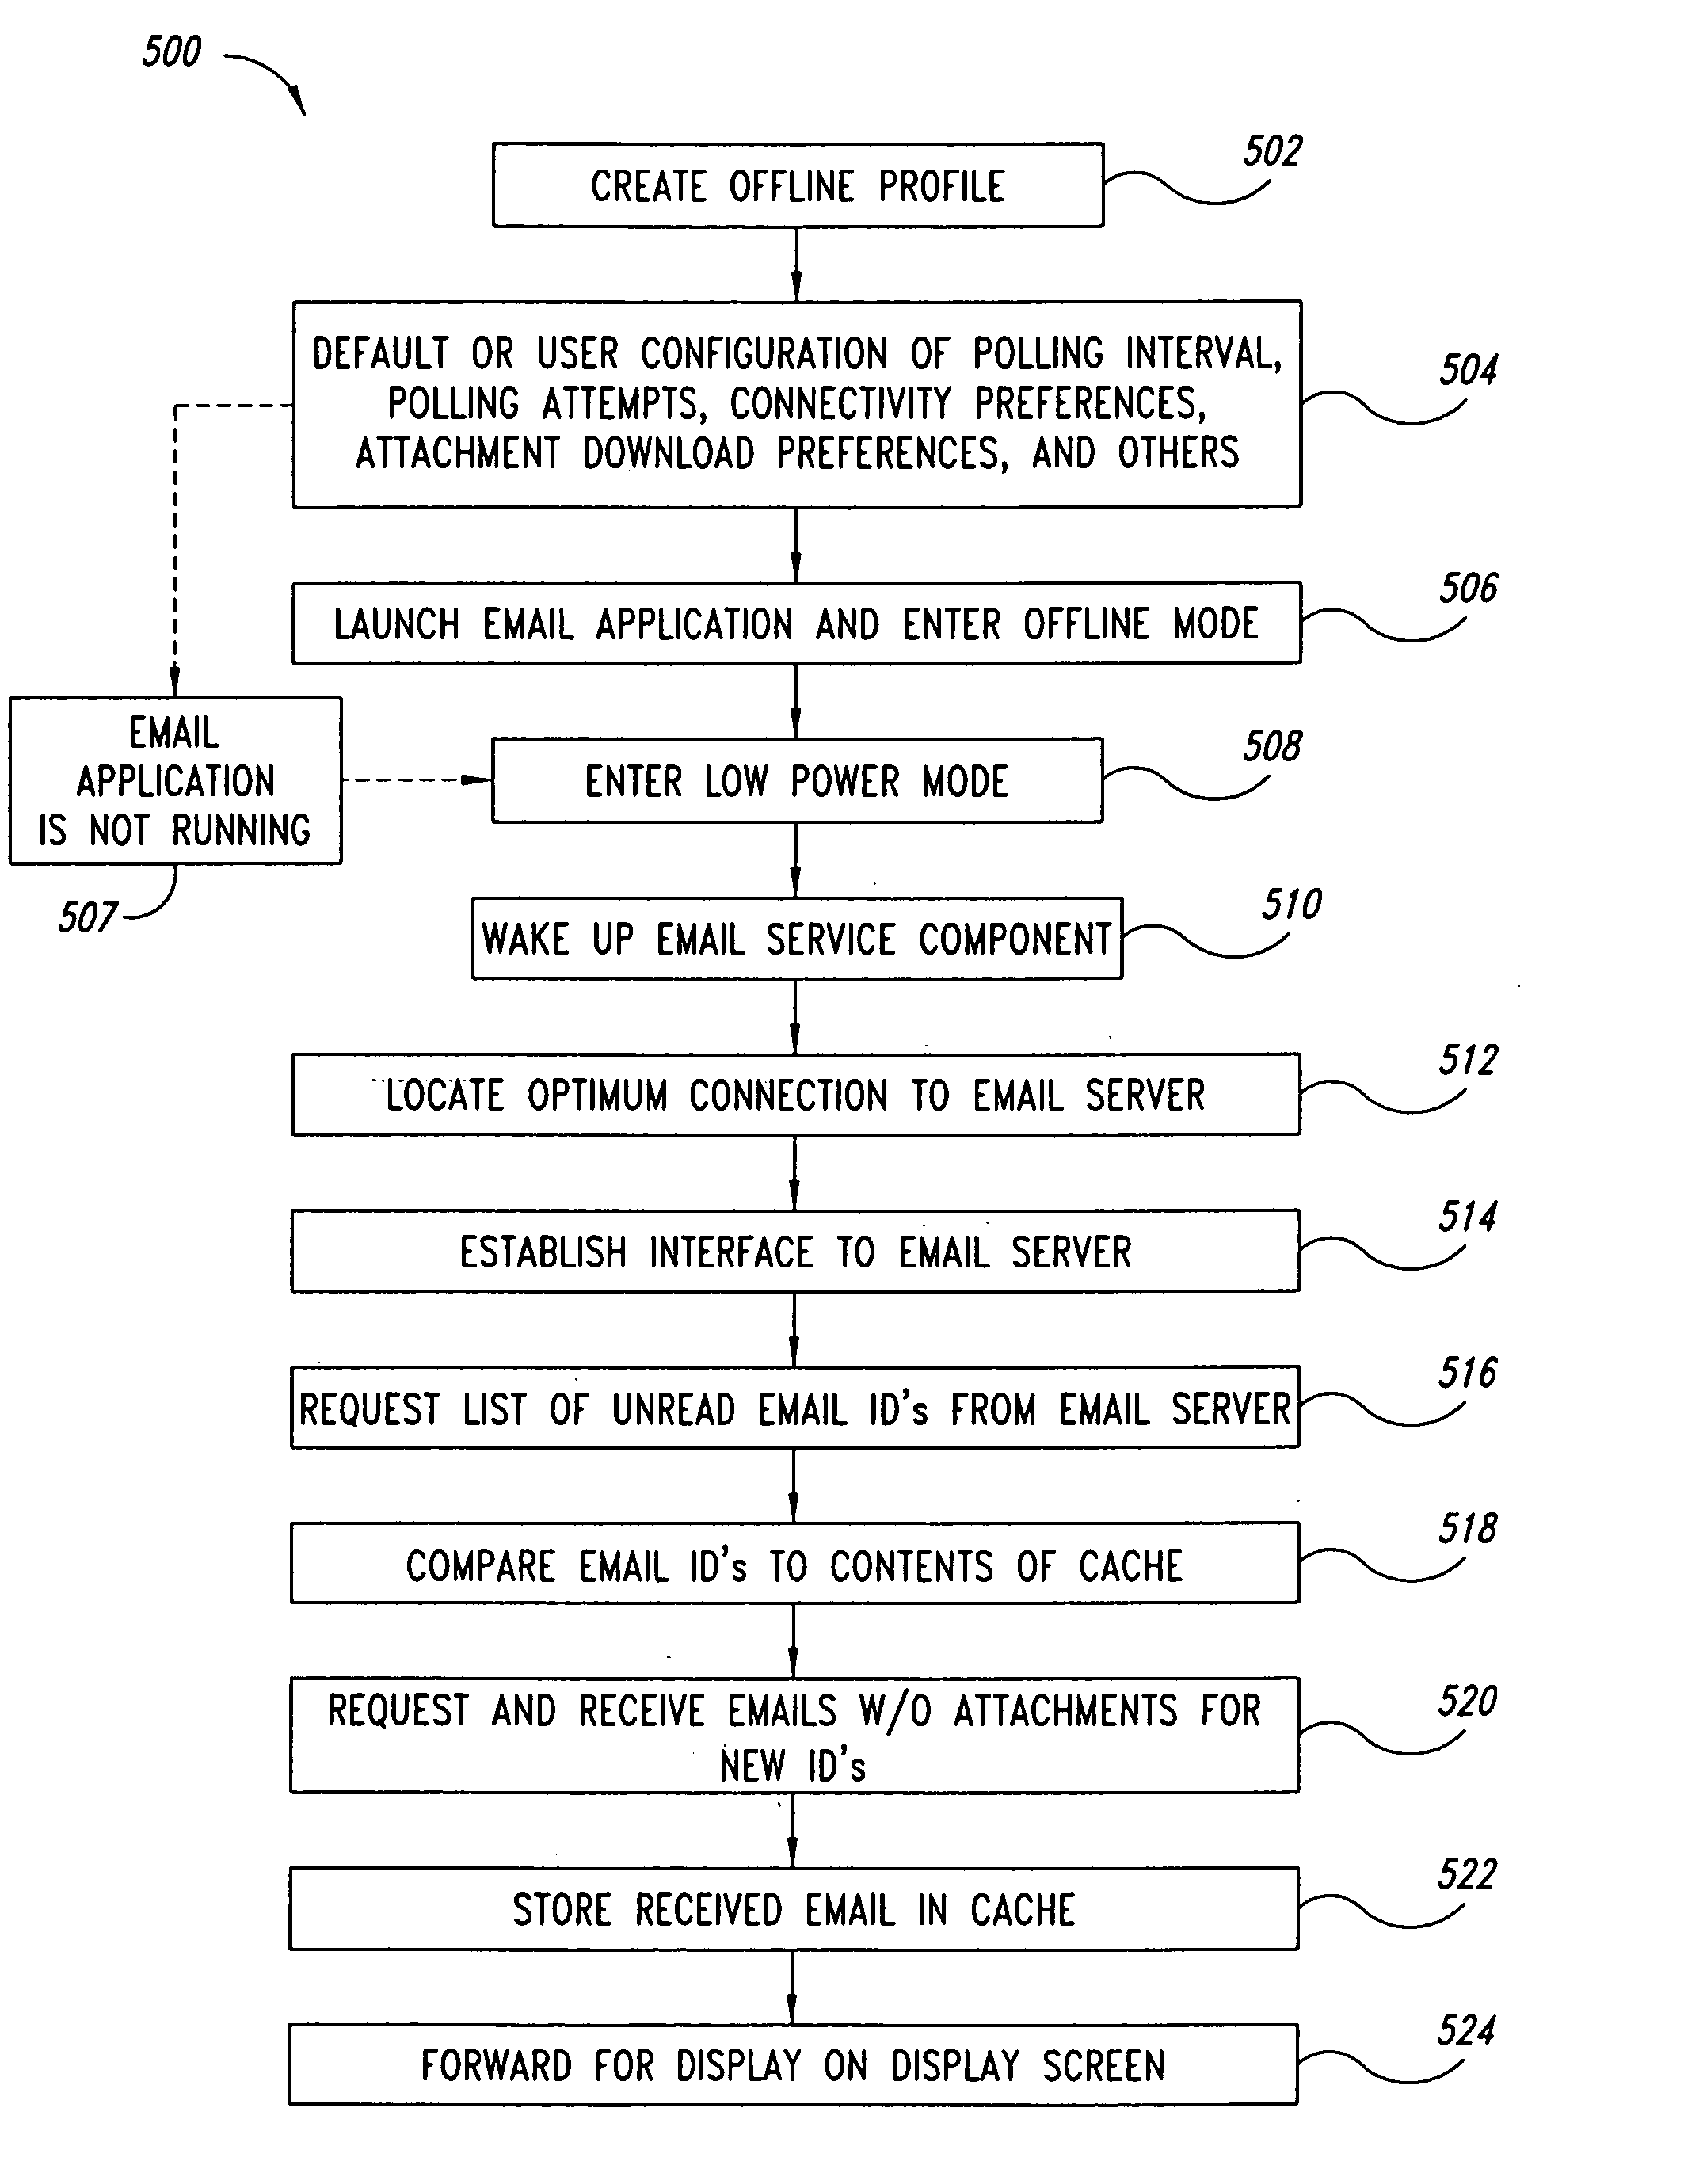 Method and system for managing email attachments for an electronic device